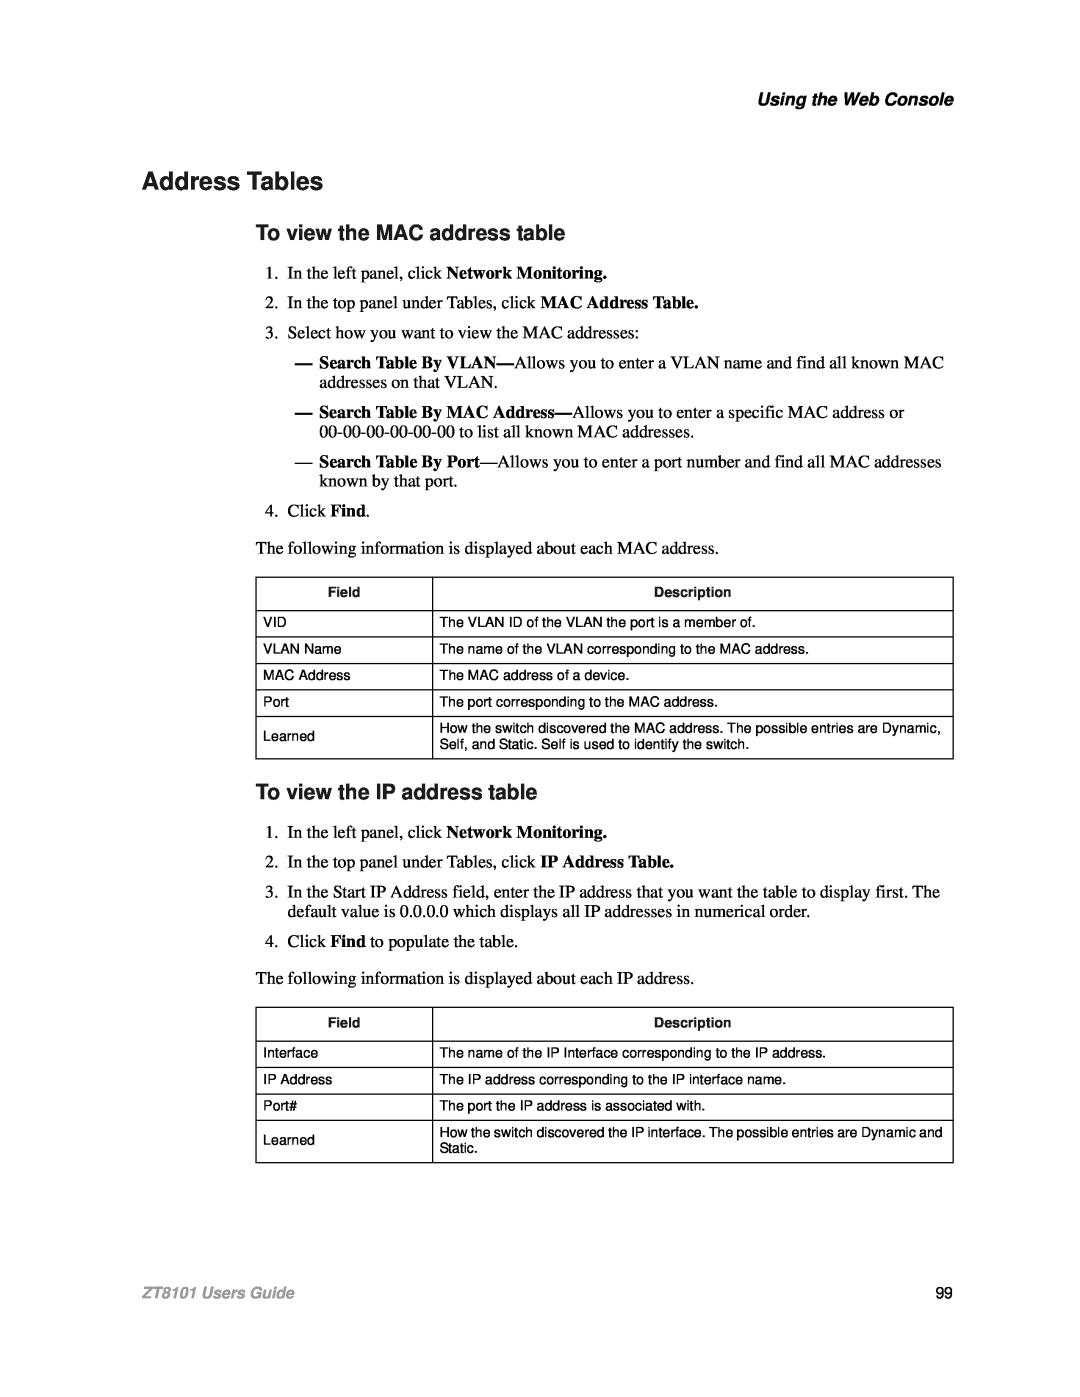 Intel ZT8101 user manual Address Tables, To view the MAC address table, To view the IP address table, Using the Web Console 